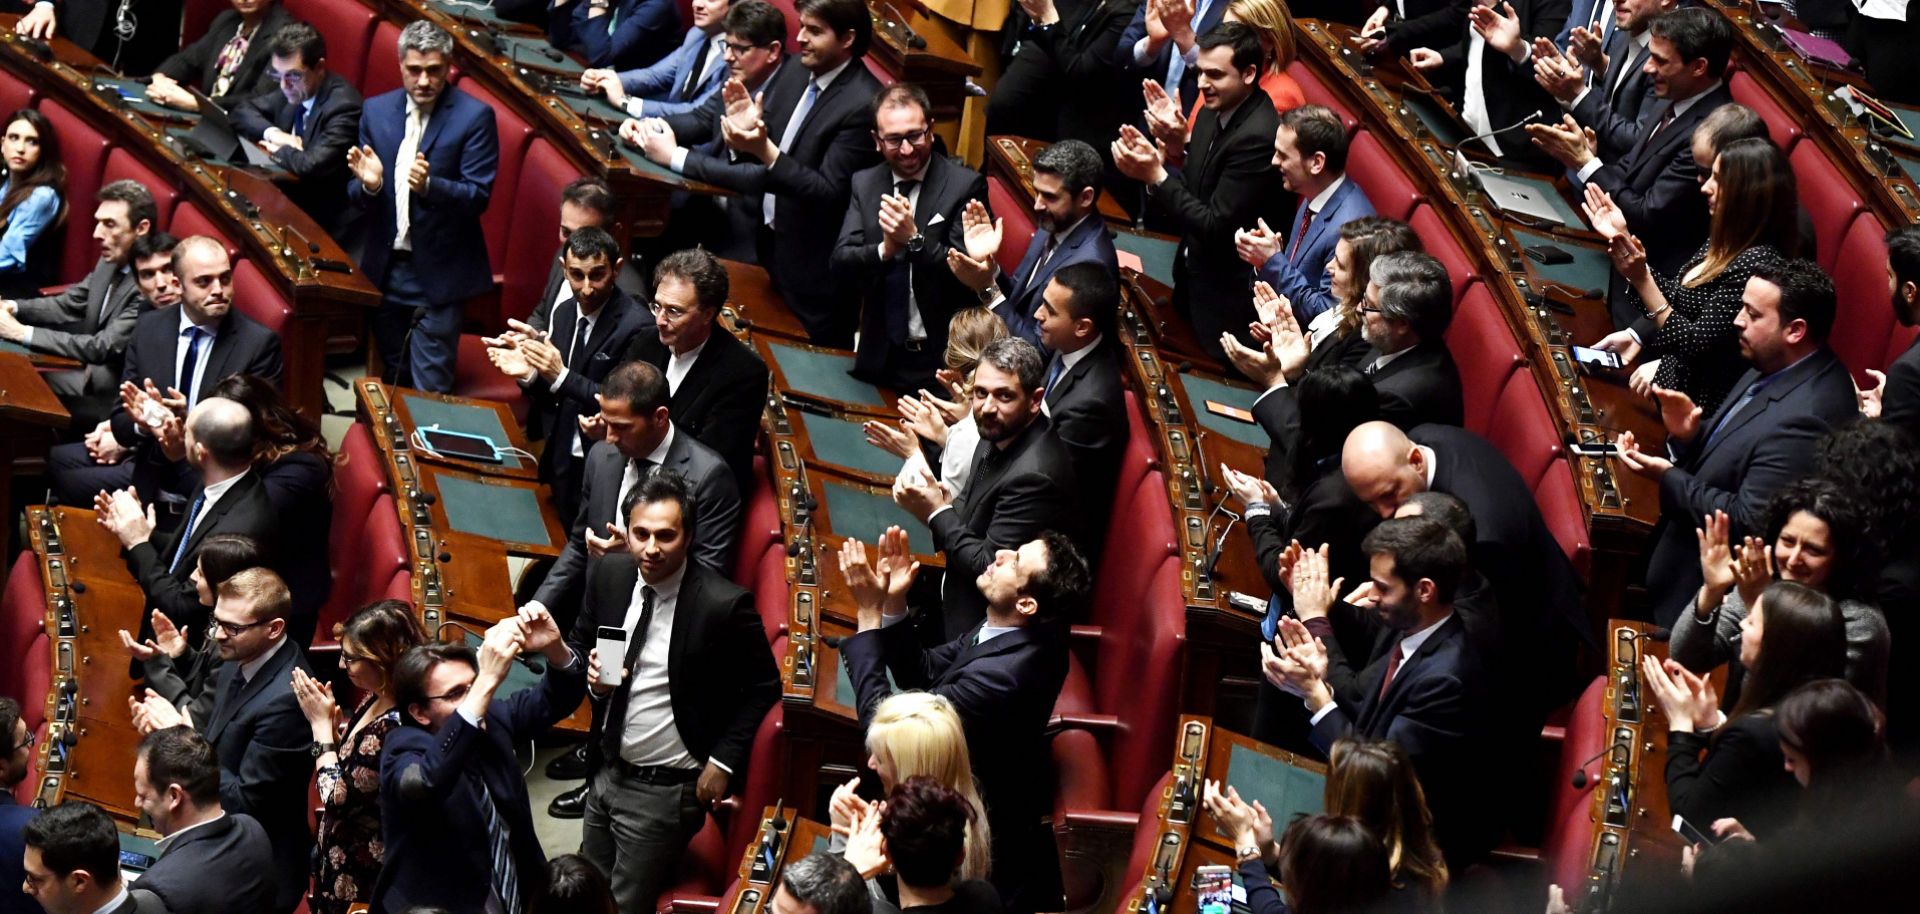 Members of the Five Star Movement political party applaud the election of one of their own, Roberto Fico, not pictured, as speaker of Italy's Chamber of Deputies in Rome on March 24, 2018.